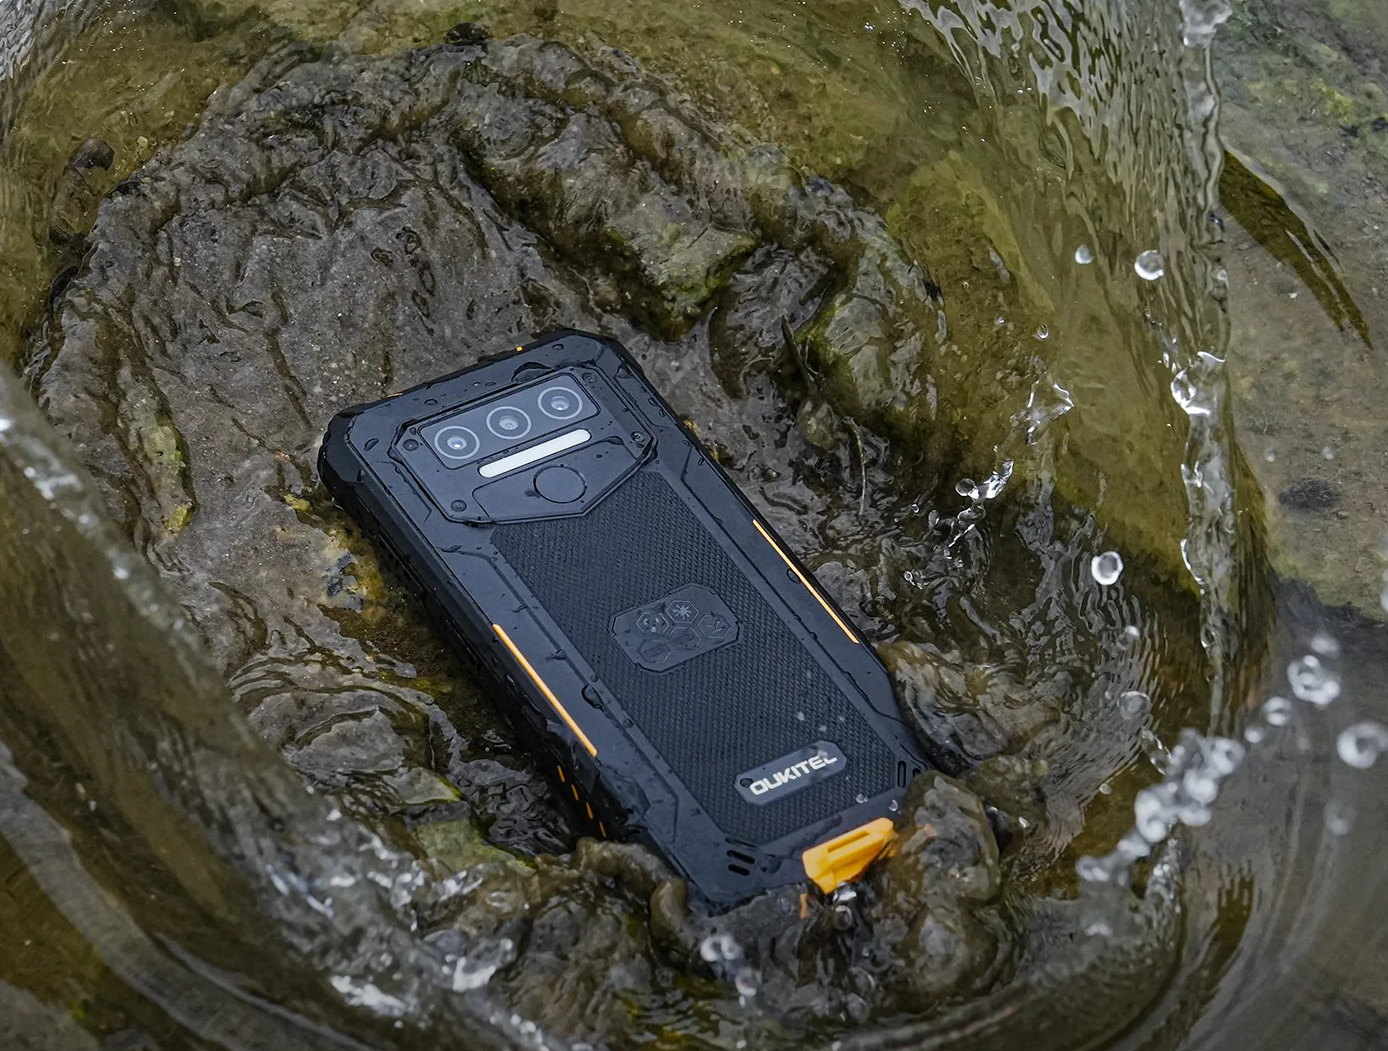 OUKITEL WP23 Pro: New budget rugged smartphone now orderable for